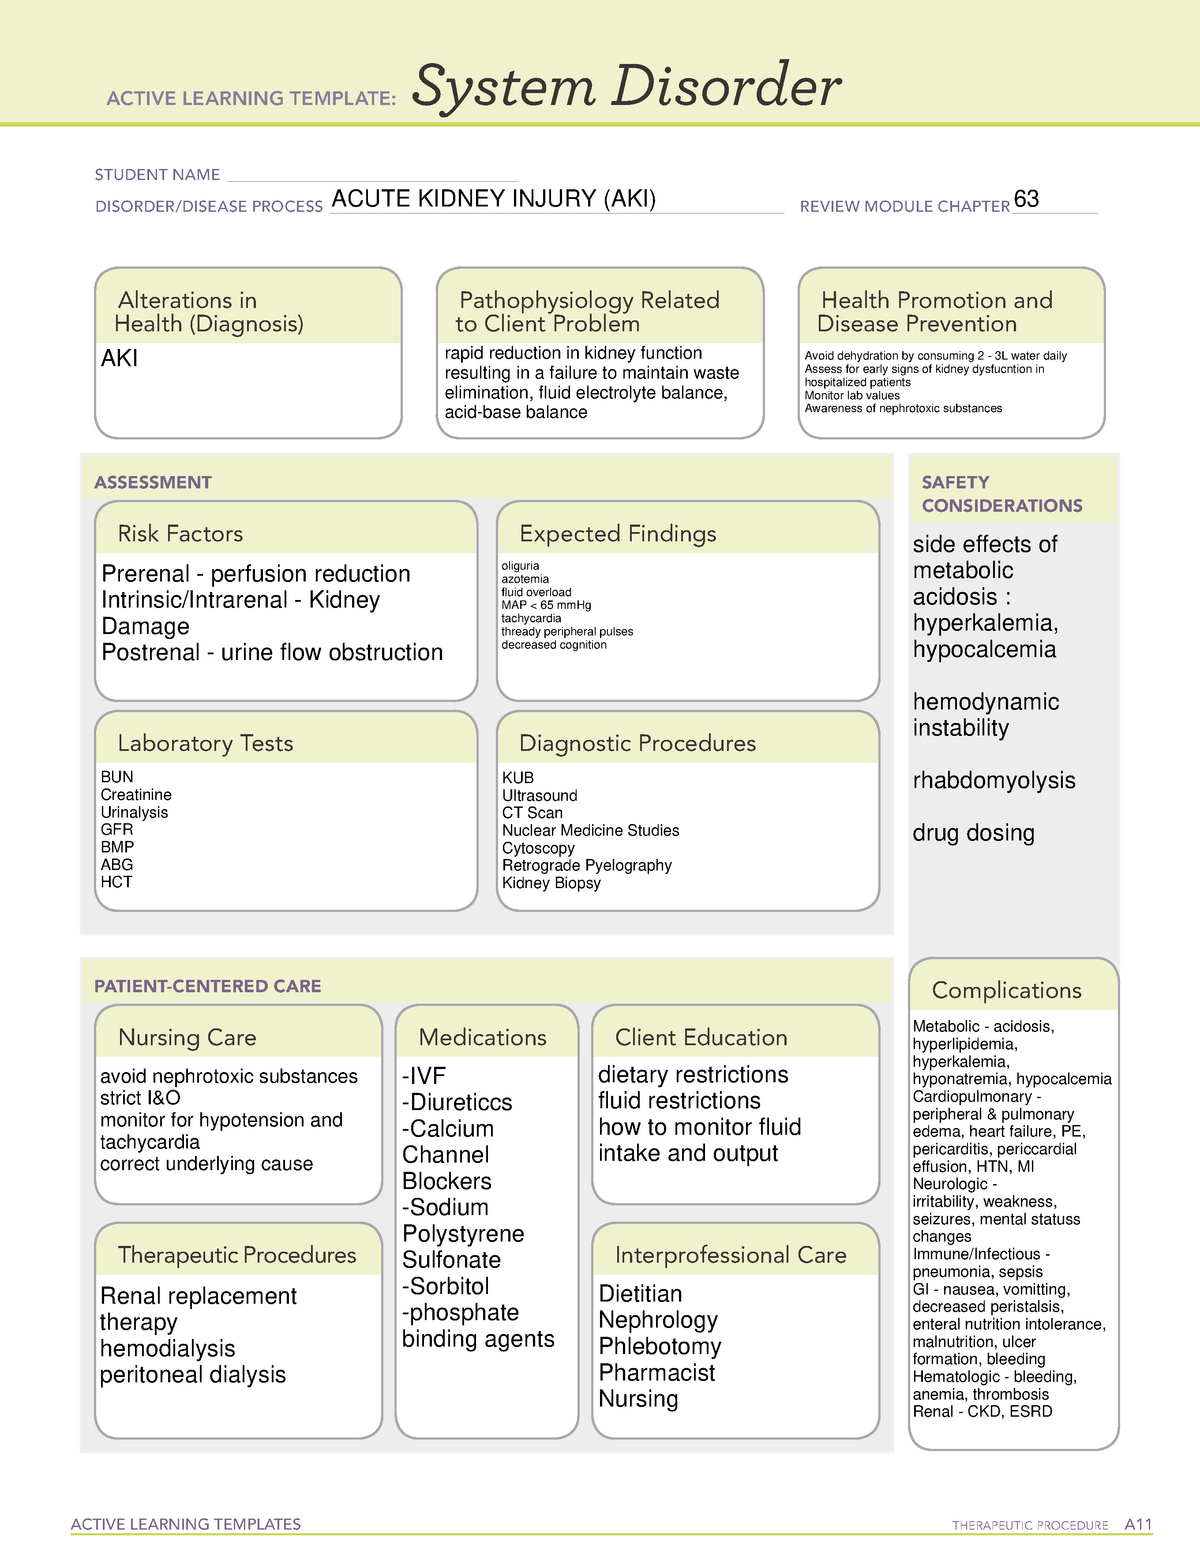 acute-kidney-injury-ati-template-active-learning-templates-therapeutic-procedure-a-system